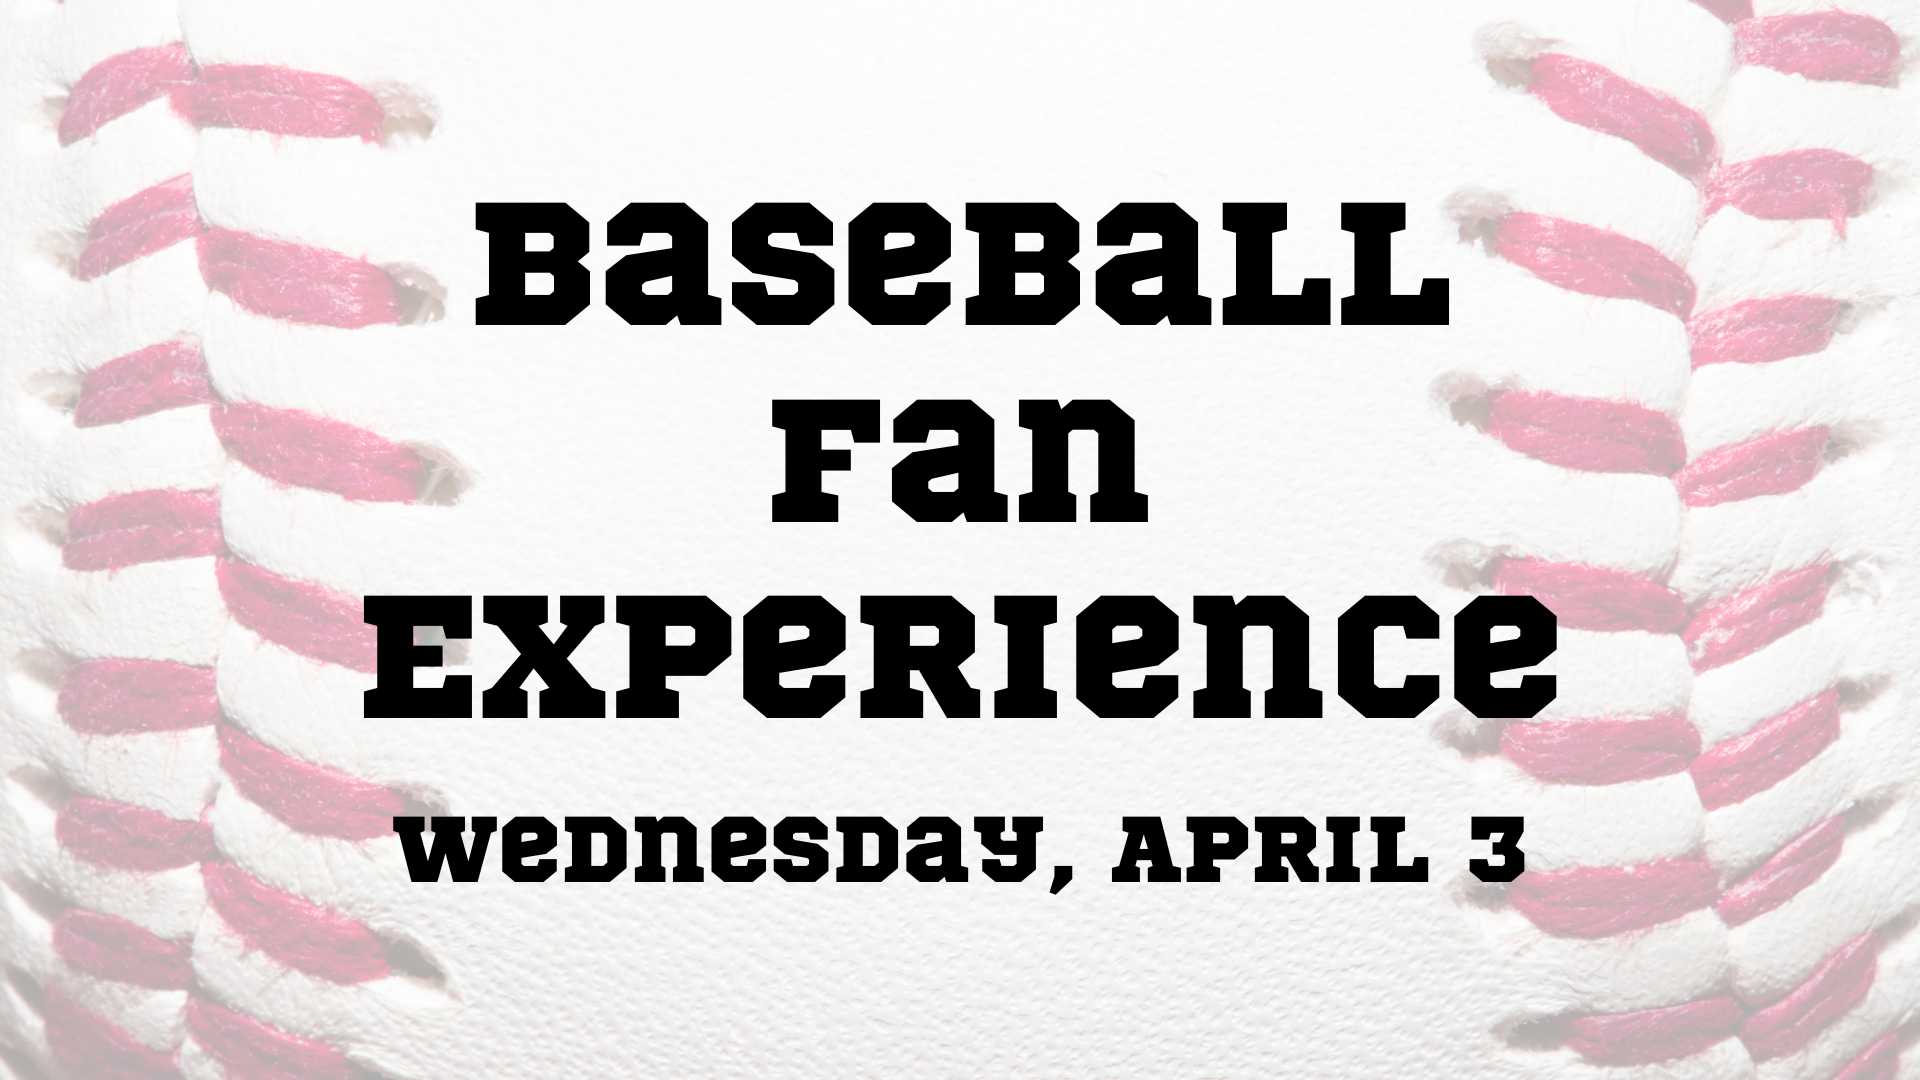 Baseball Fan Experience graphic